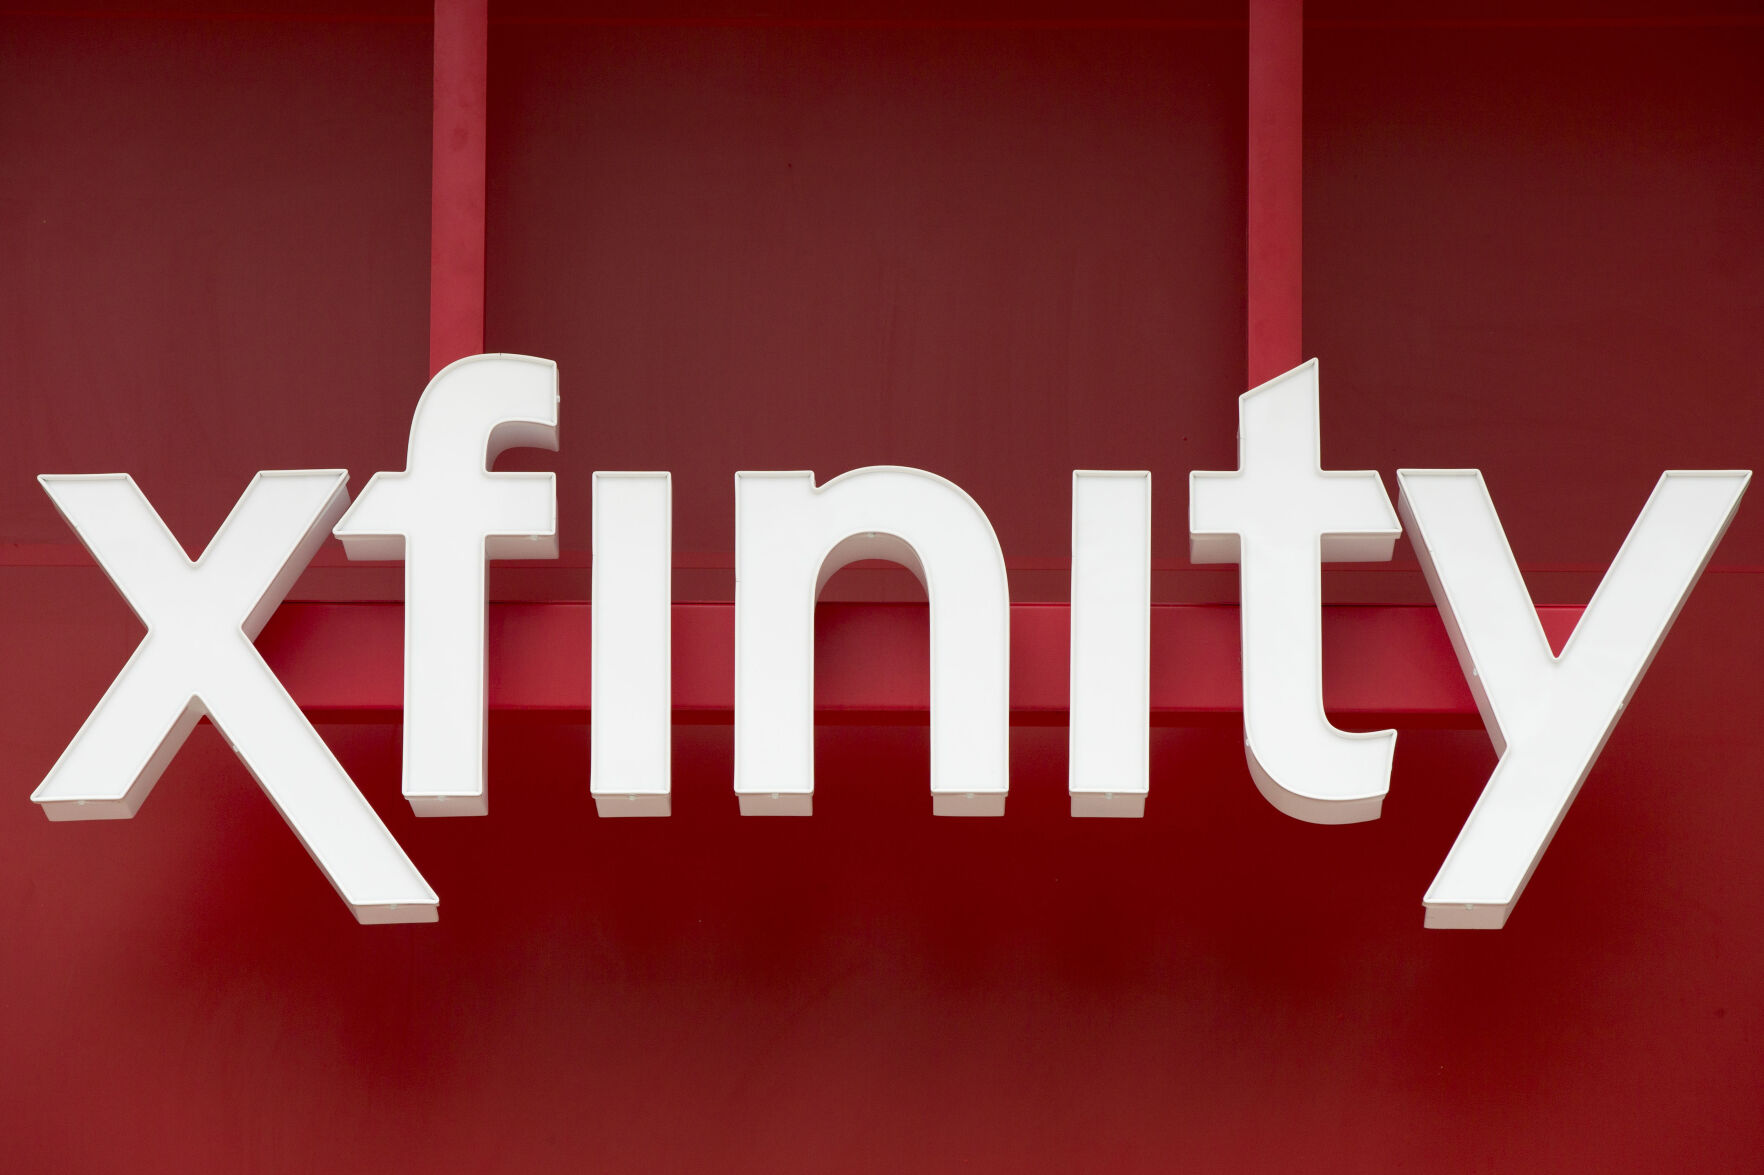 <p>FILE - Signage for Xfinity, the cable division of Comcast, is displayed in Philadelphia, July 15, 2015. Hackers accessed Xfinity customers’ personal information by exploiting a vulnerability in software used by the company, the Comcast-owned telecommunications business announced this week. In a Monday, Dec. 18, 2023, notice to customers, Xfinity said there was unauthorized access to internal systems as a result of this vulnerability — which was previously announced by software provider Citrix — between Oct. 16 and 19. (AP Photo/Matt Rourke, File)</p>   PHOTO CREDIT: Matt Rourke